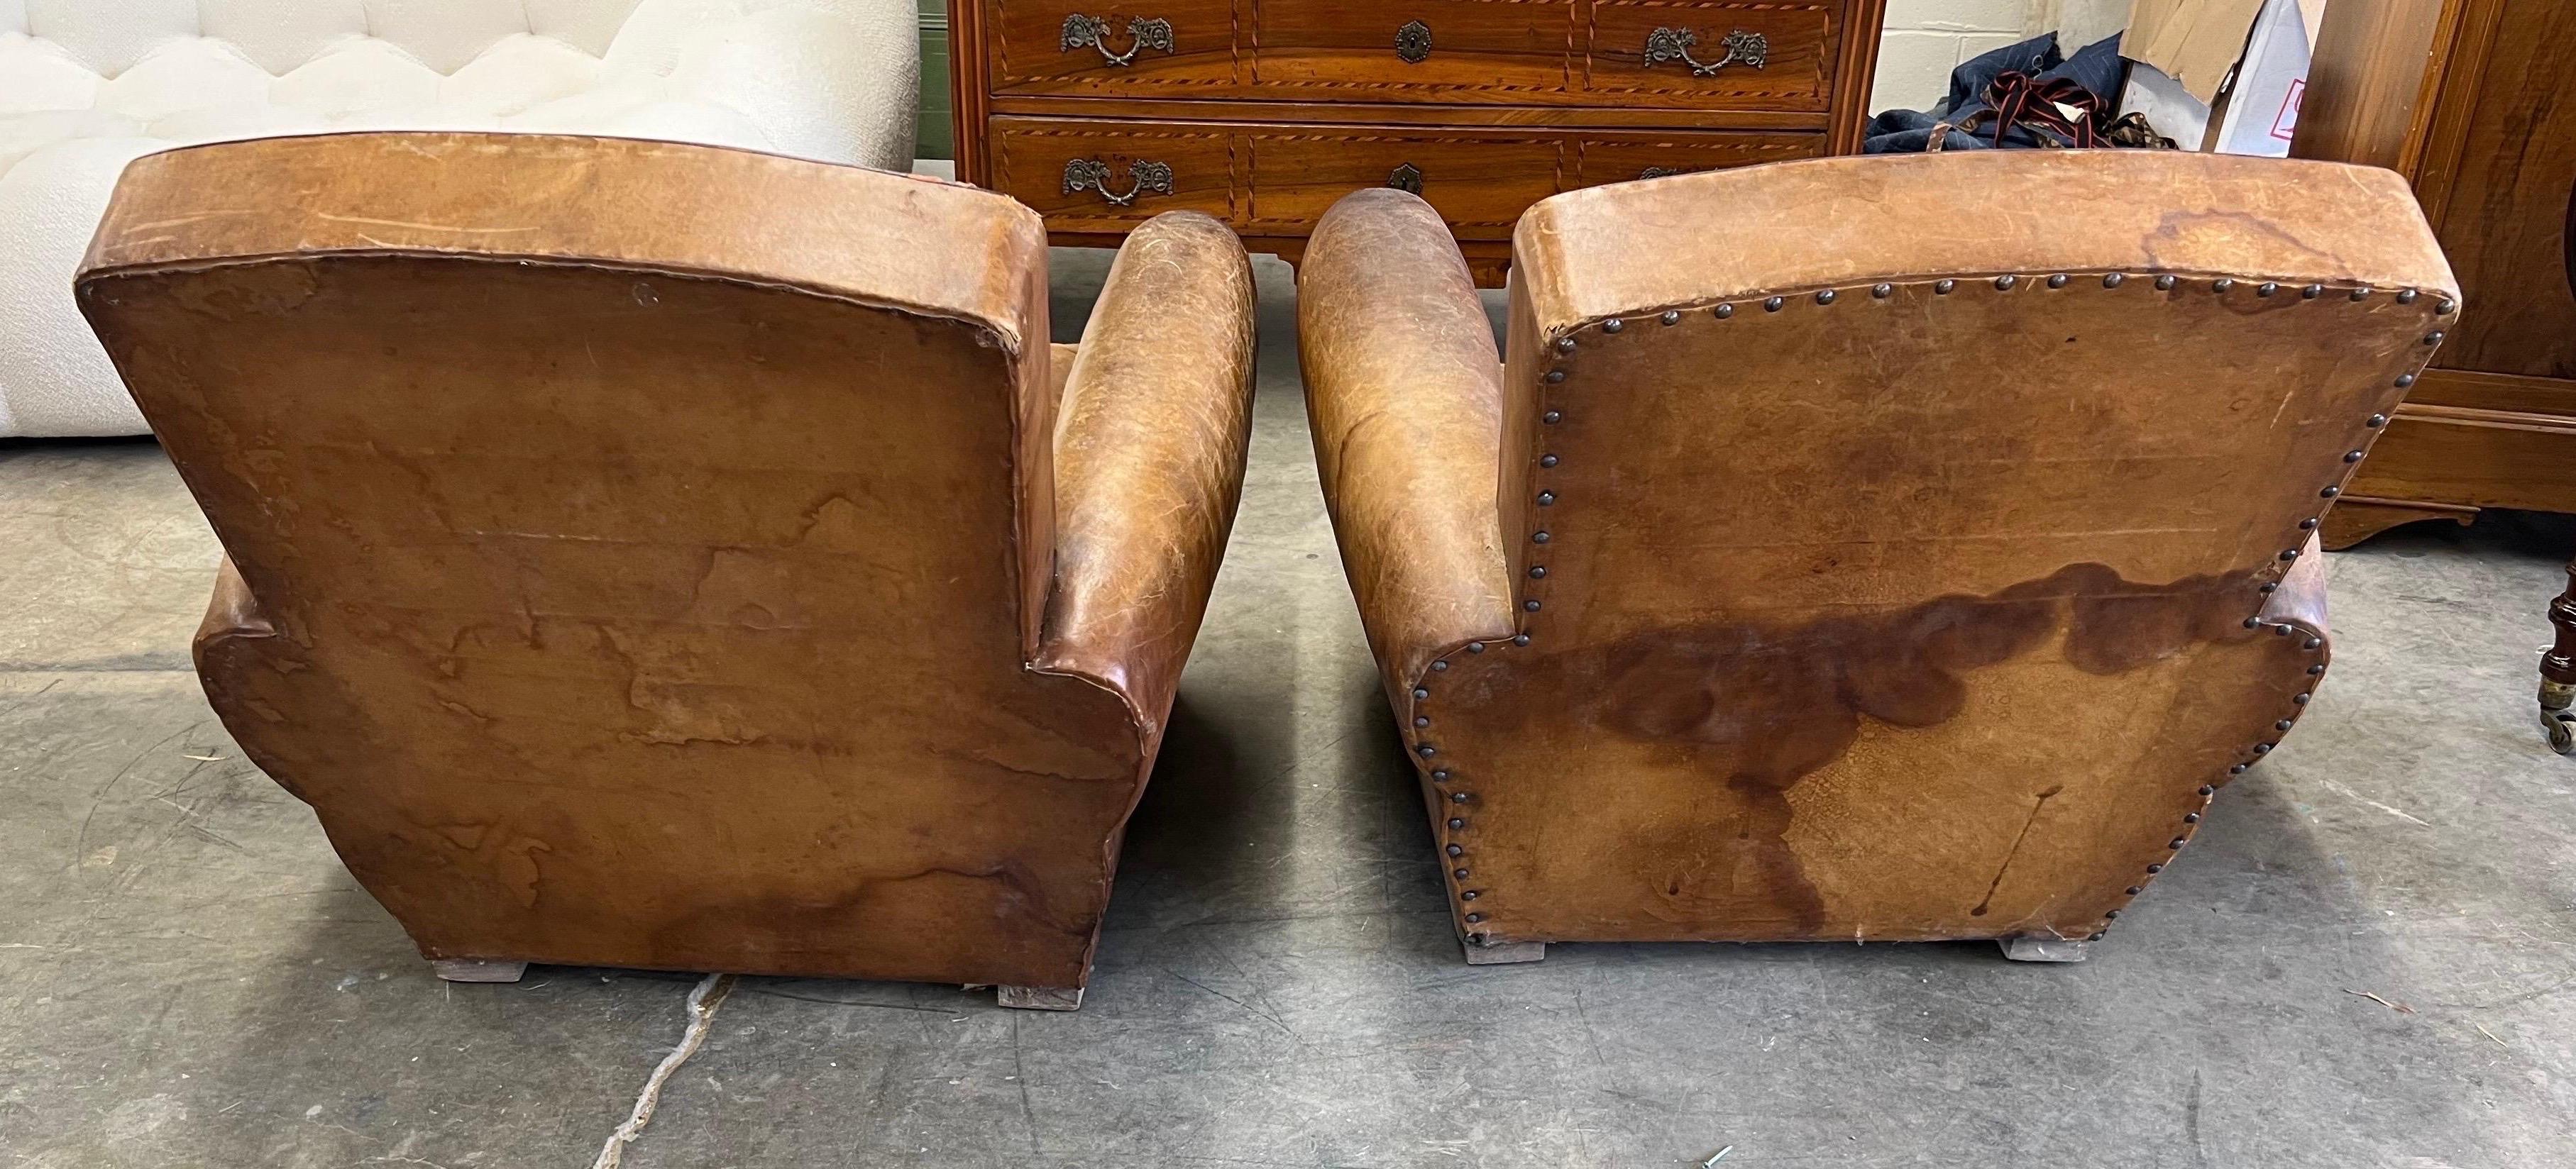 Pair of French Deco Period Leather Club Chairs with Great Patina For Sale 1